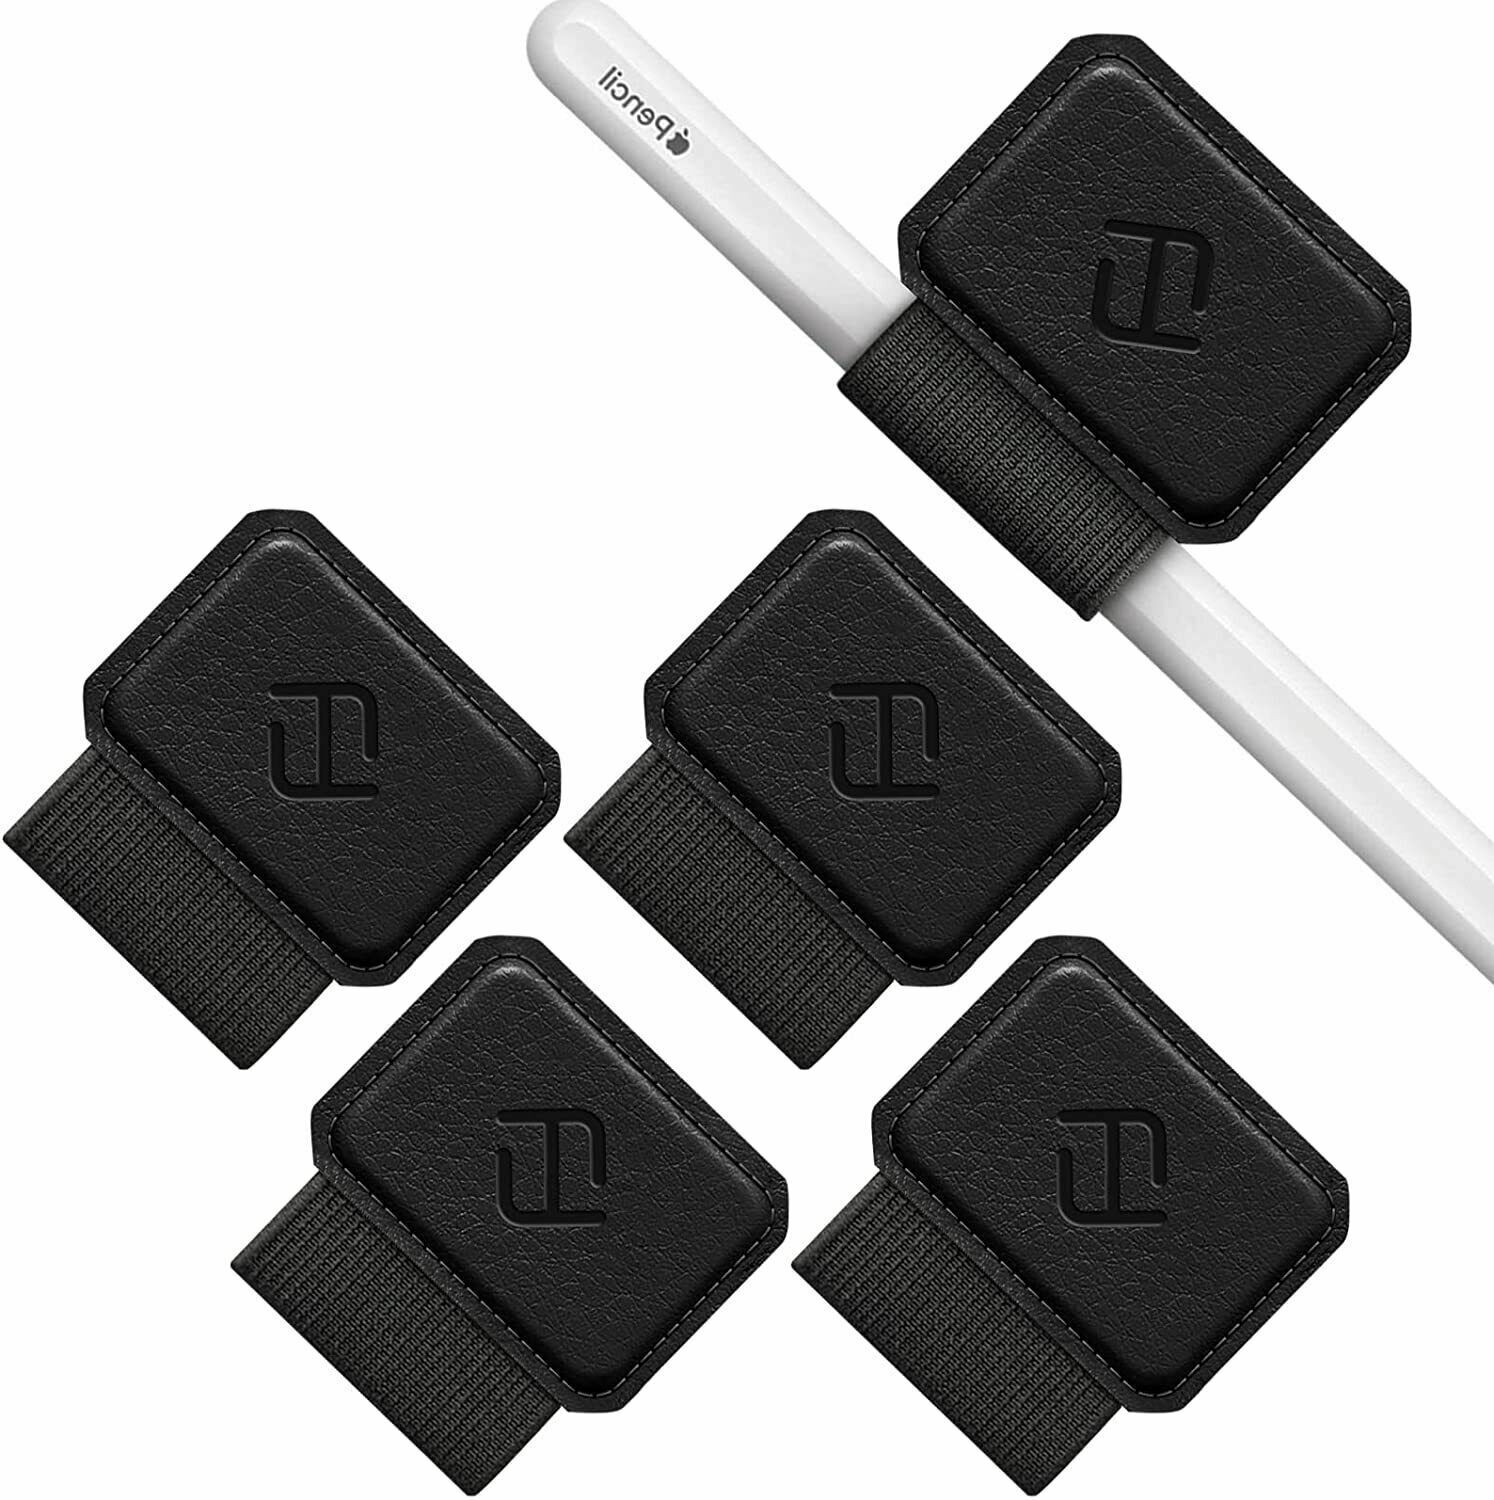 [4 Pack] Pen Loop Holder for Apple Pencil 1st 2nd Gen Elastic Adhesive Pen Pouch